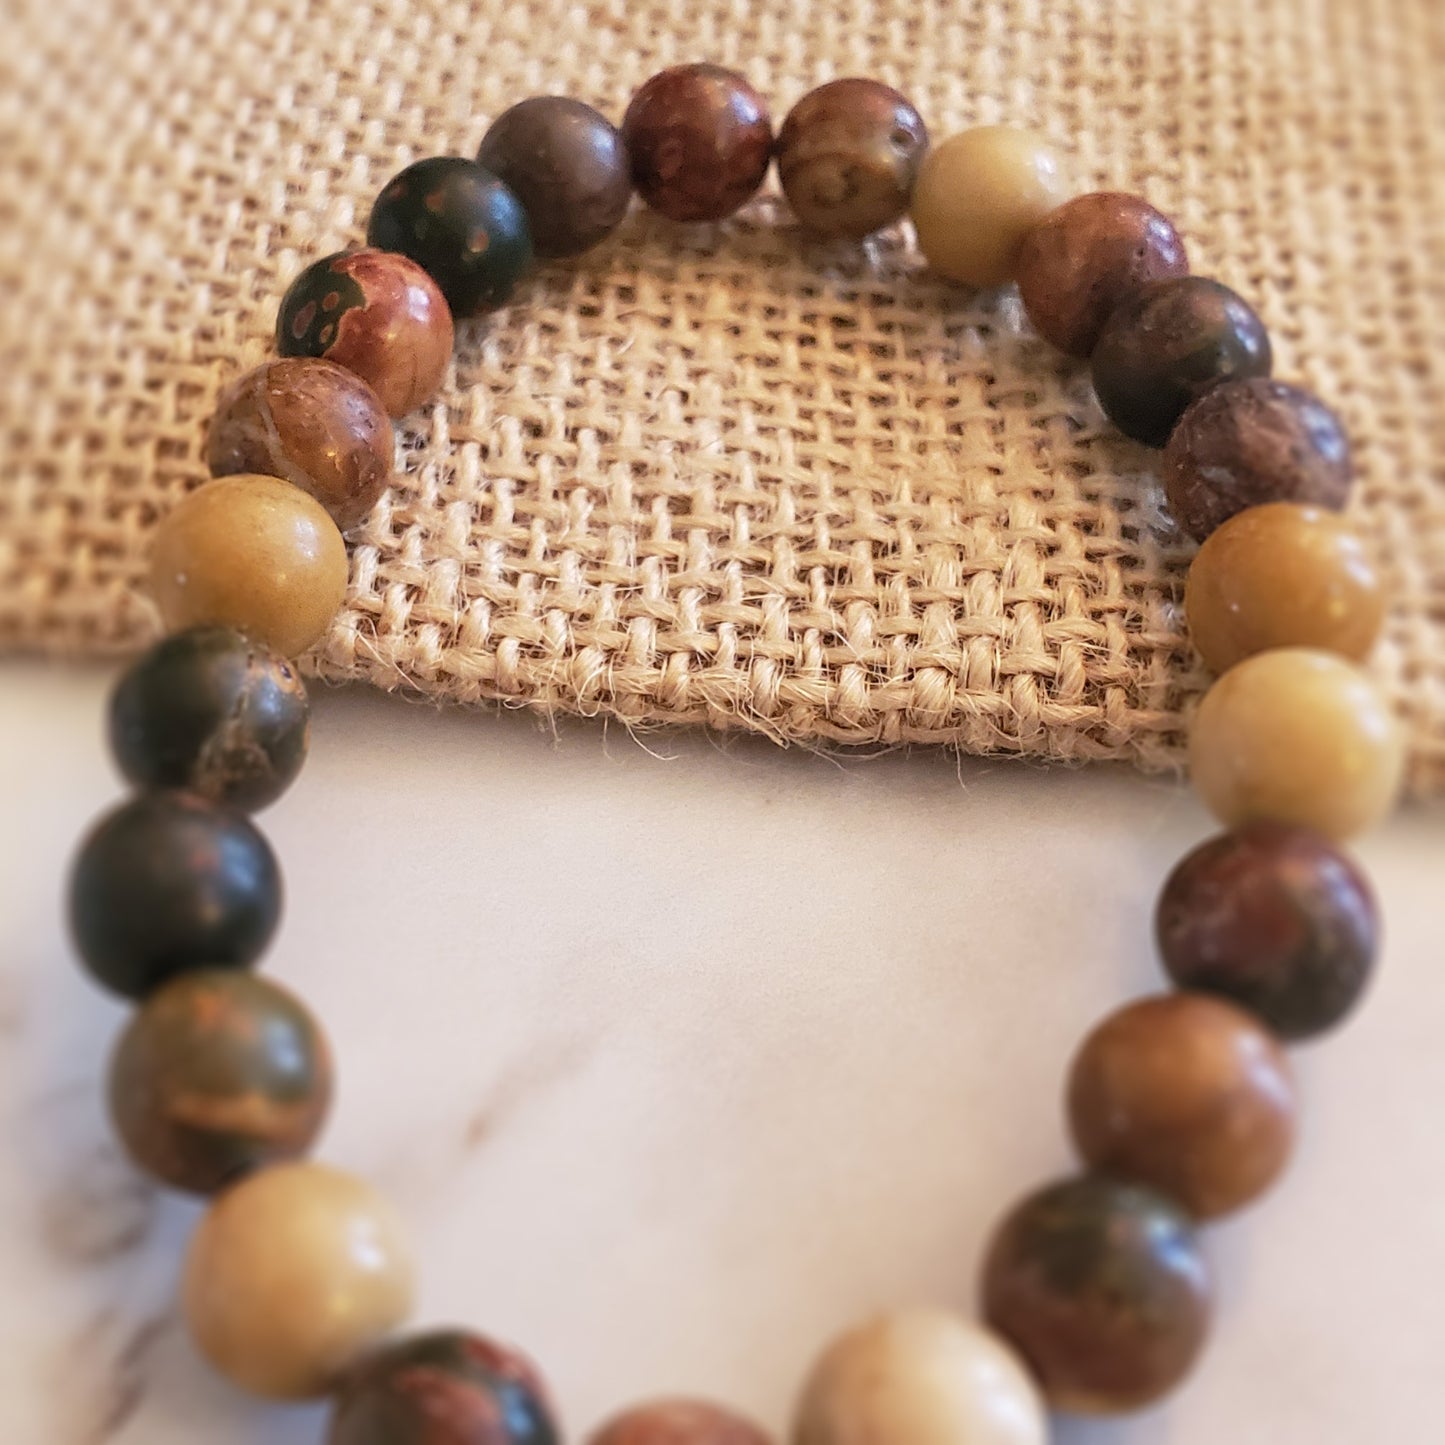 Genuine Picasso Jasper bracelet bought here locally in Southern California.